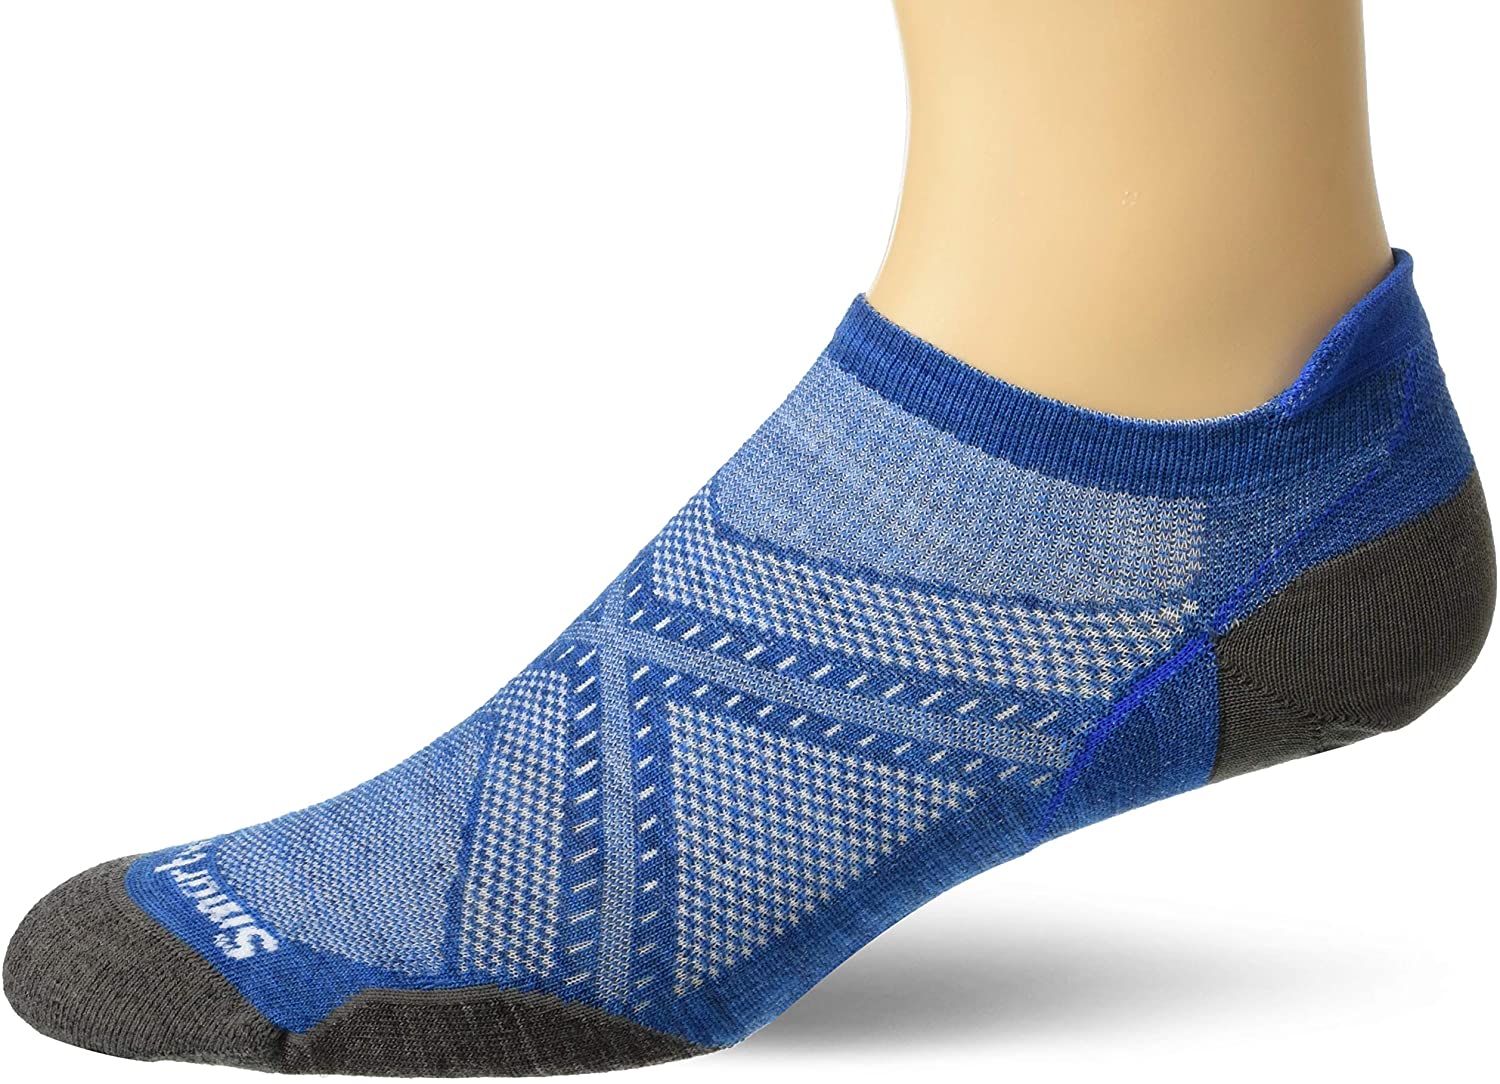 Unisex Smartwool Phd Run Ultra Light Micro Sock Neptune Blue from the side view